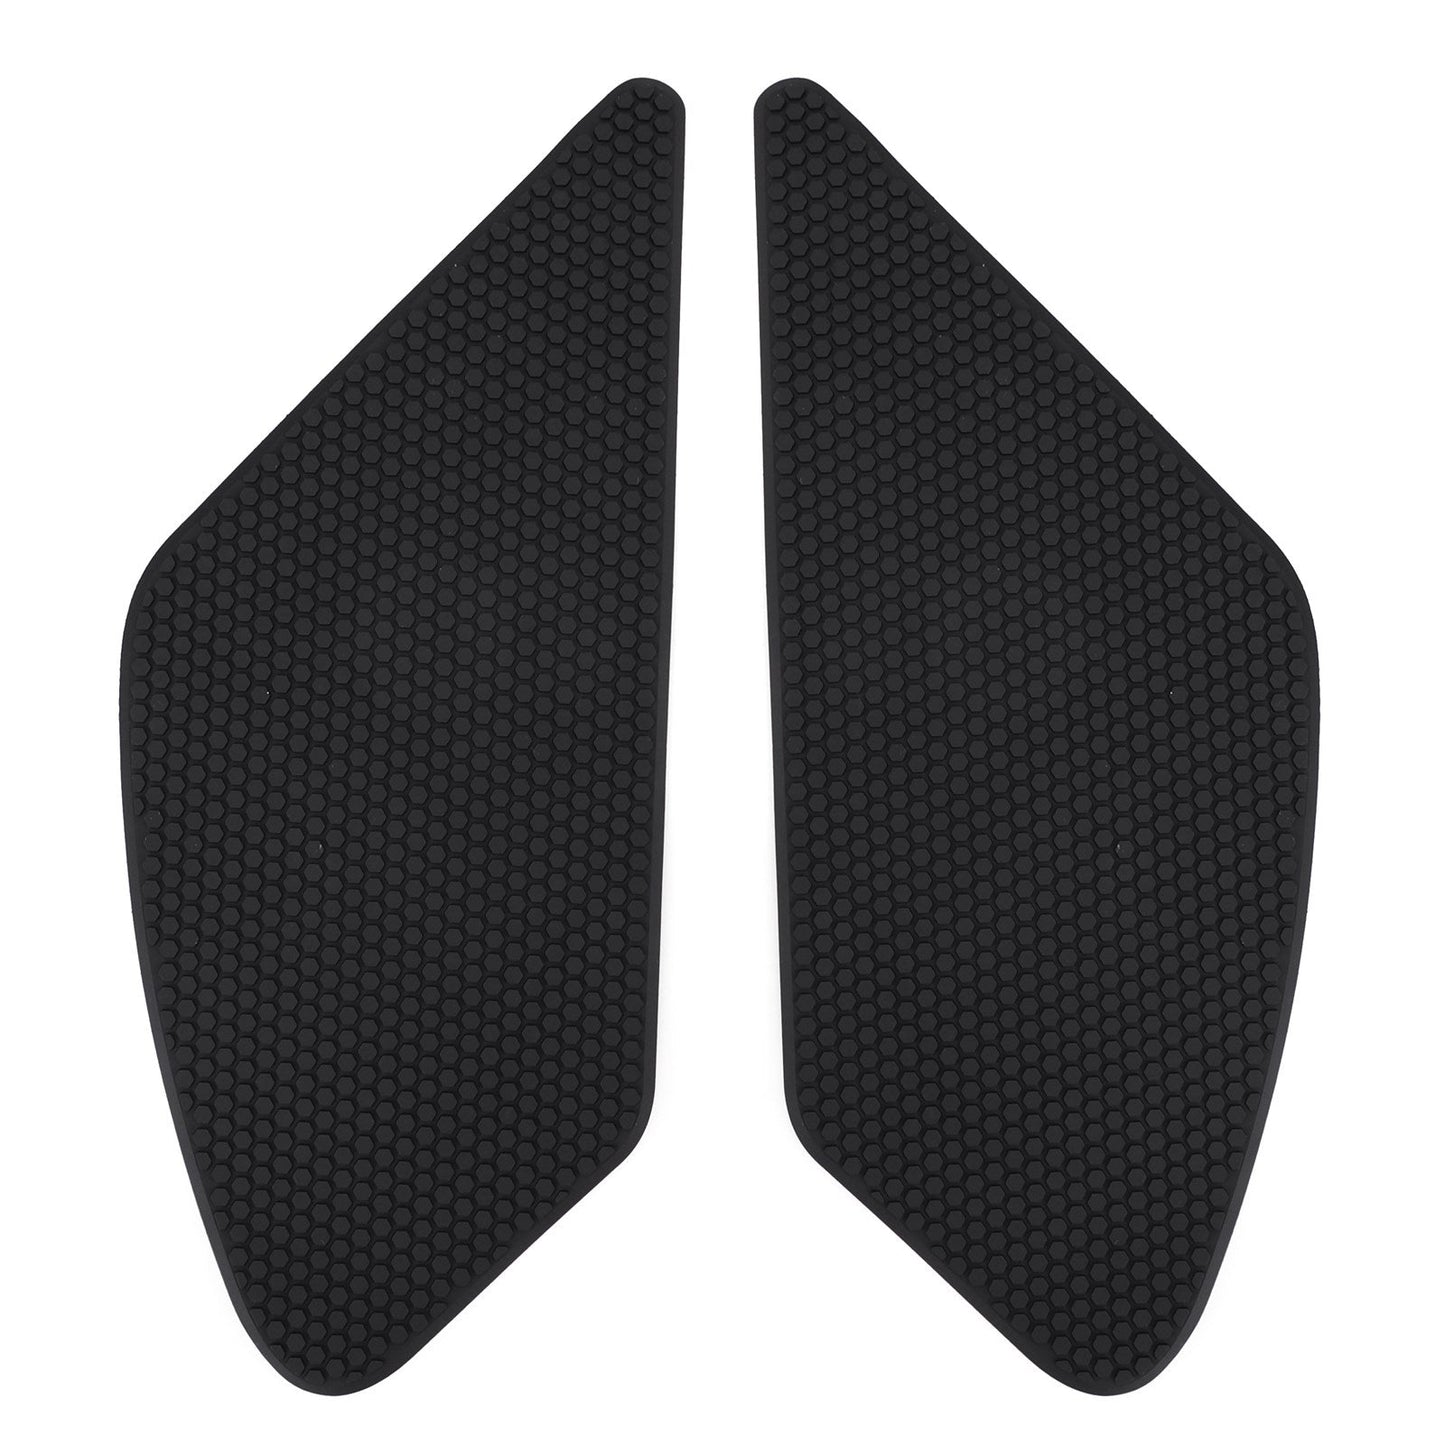 2X Side Tank Traction Grips Pads Fit For Ducati Monster 797 17-19 Rubber Black